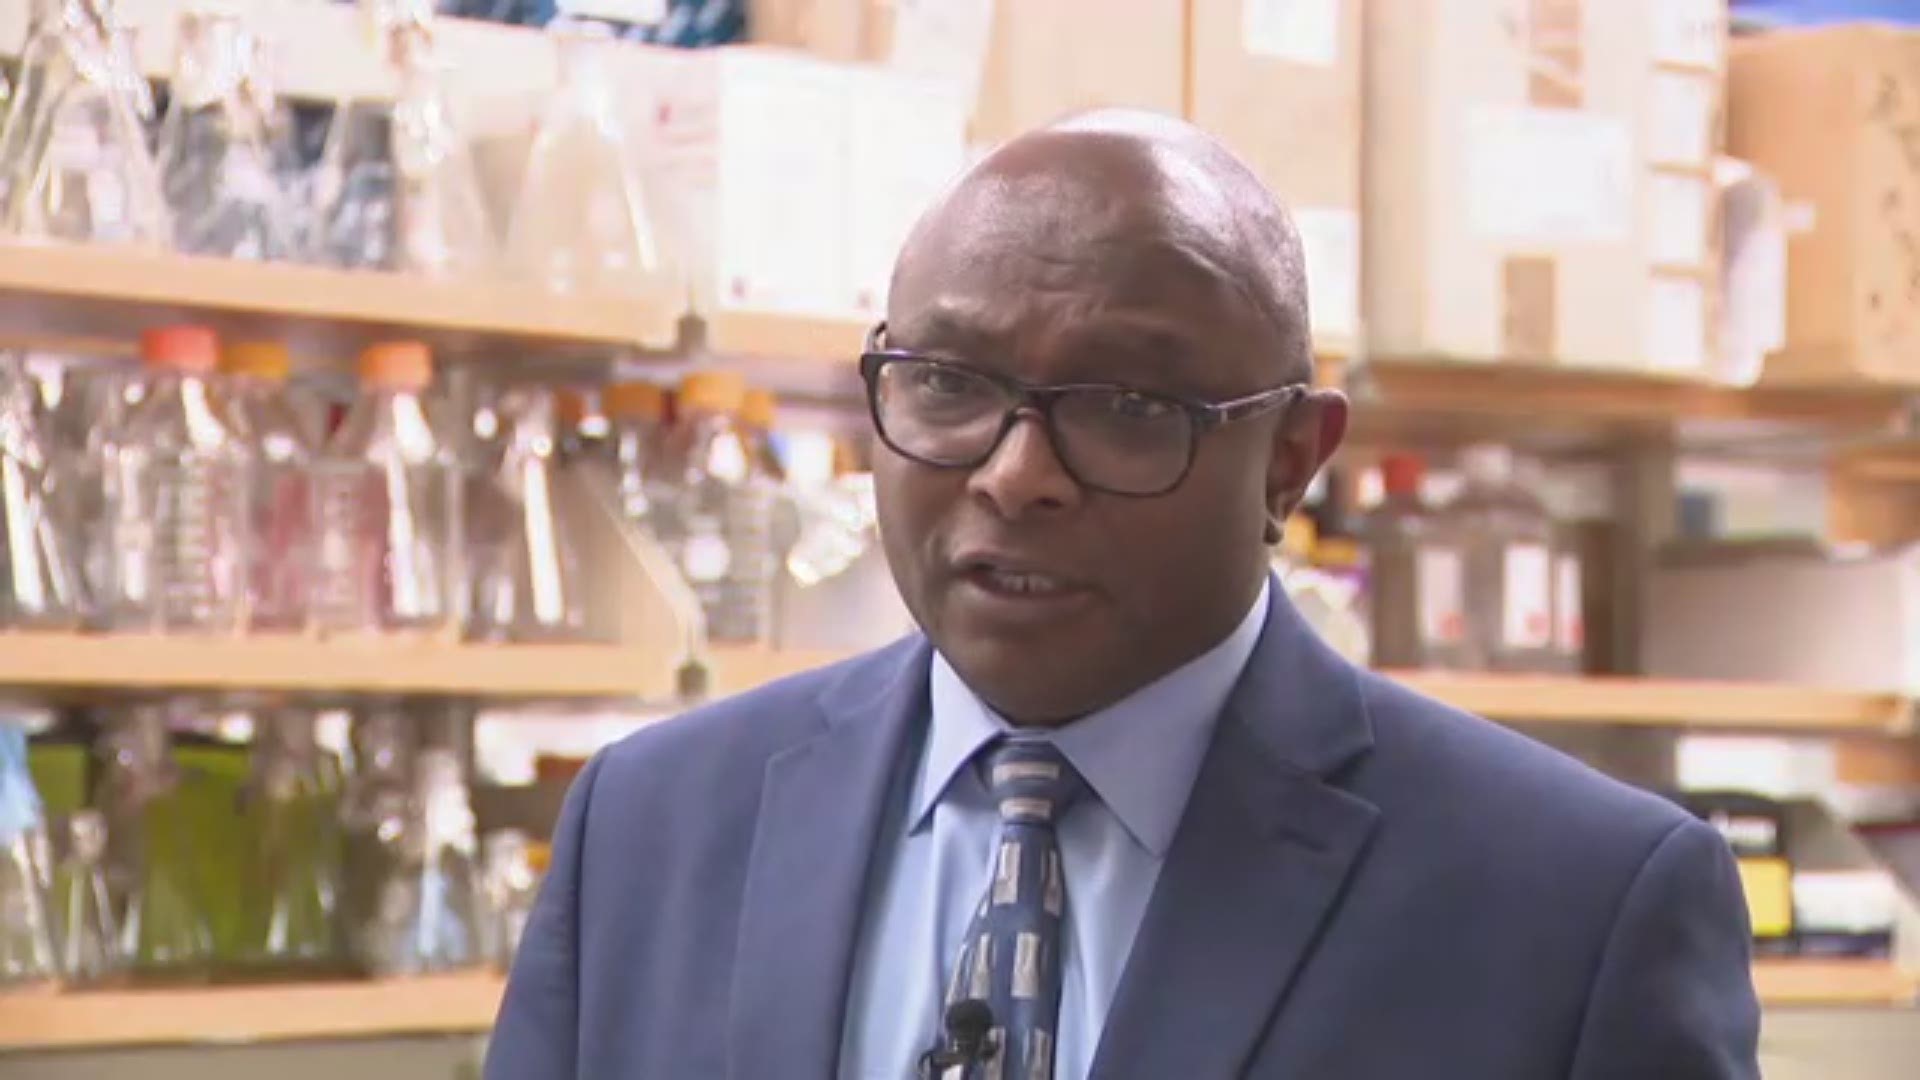 Dr. Kunle Odunsi talks about Roswell's new ovarian cancer research project.